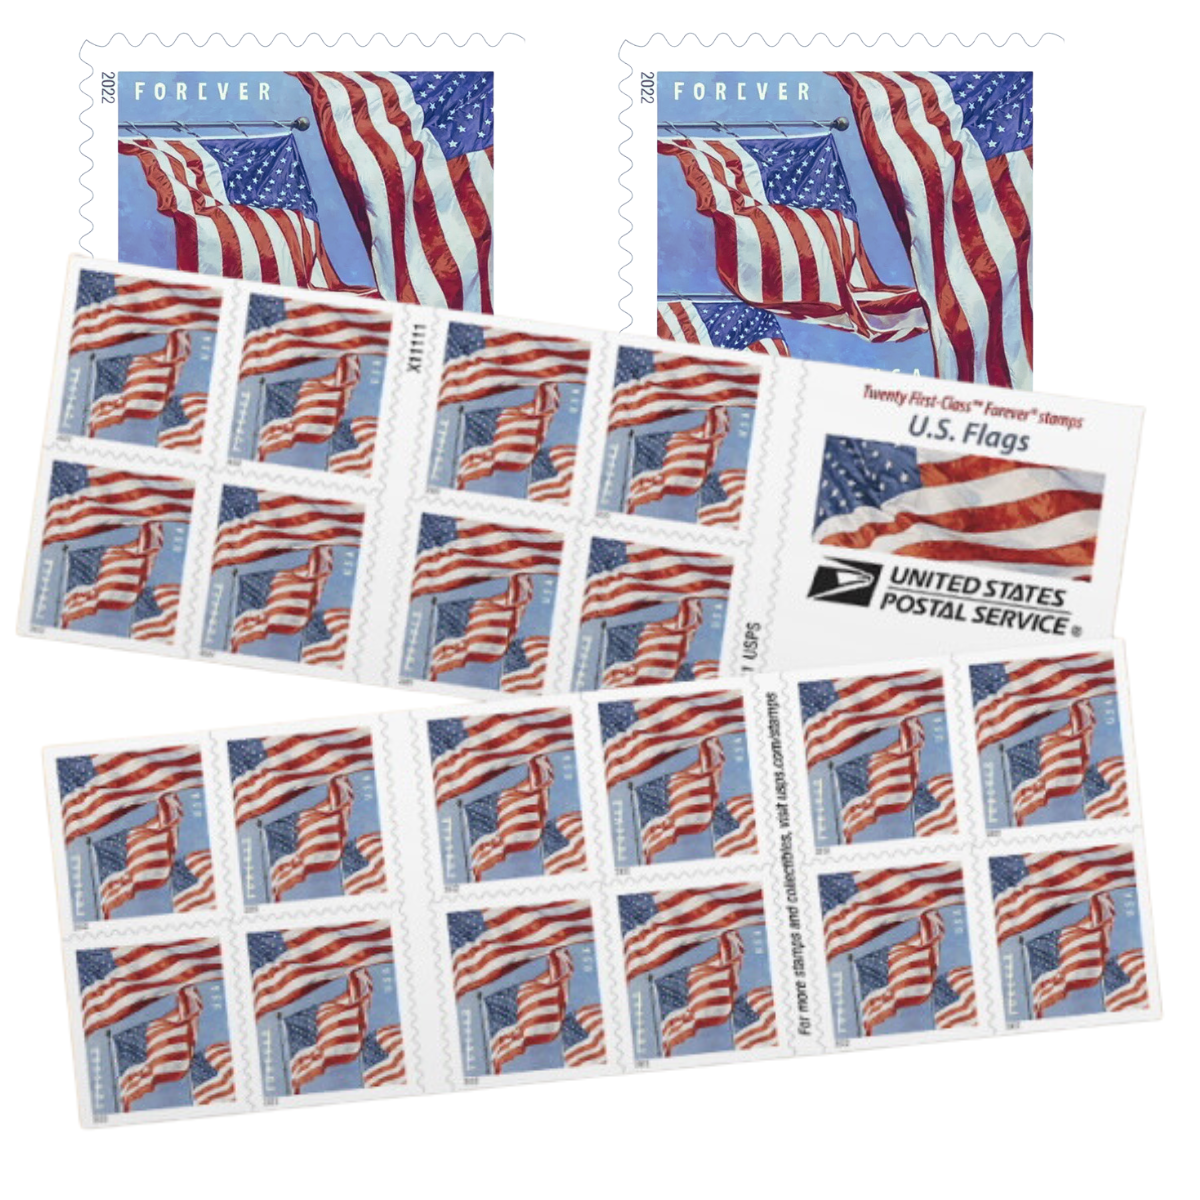 2018 USPS Forever First Class Postage Stamps~ Sealed Coil/Roll Of 100 Stamps